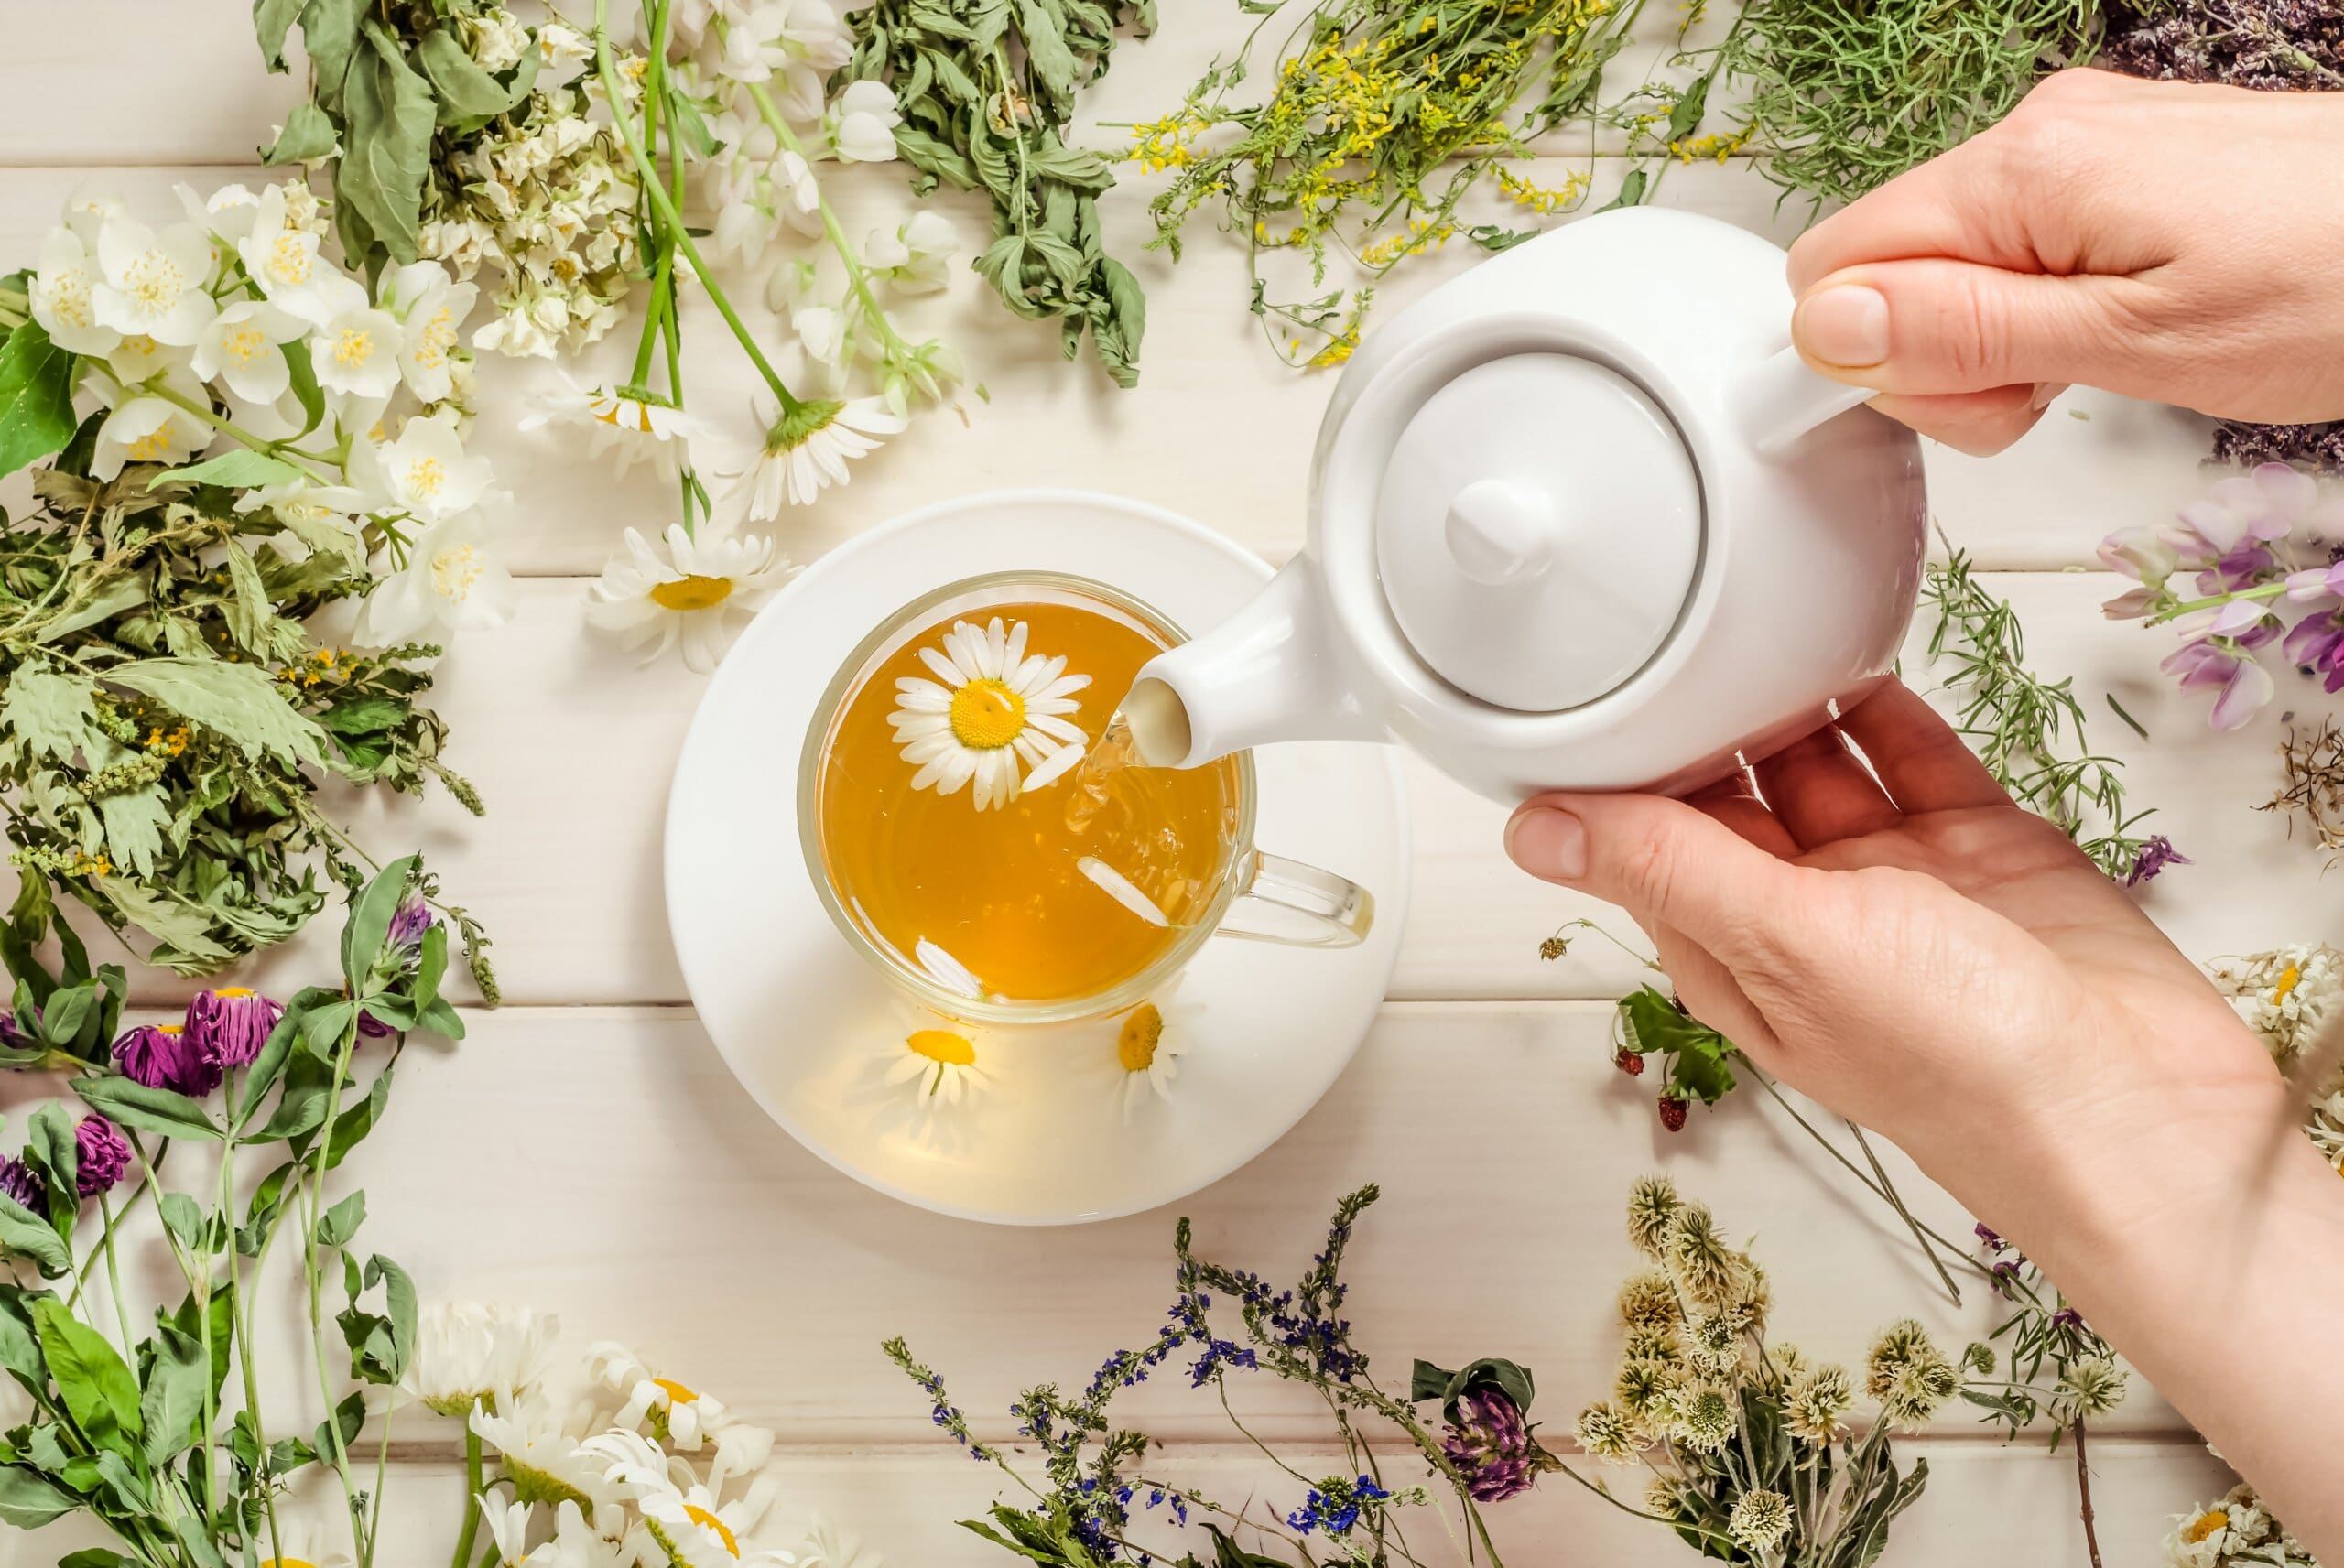 Woman's hands pouring a cup of chamomile tea from a teapot. Mug is surrounded by an array of fresh and dried flowers.